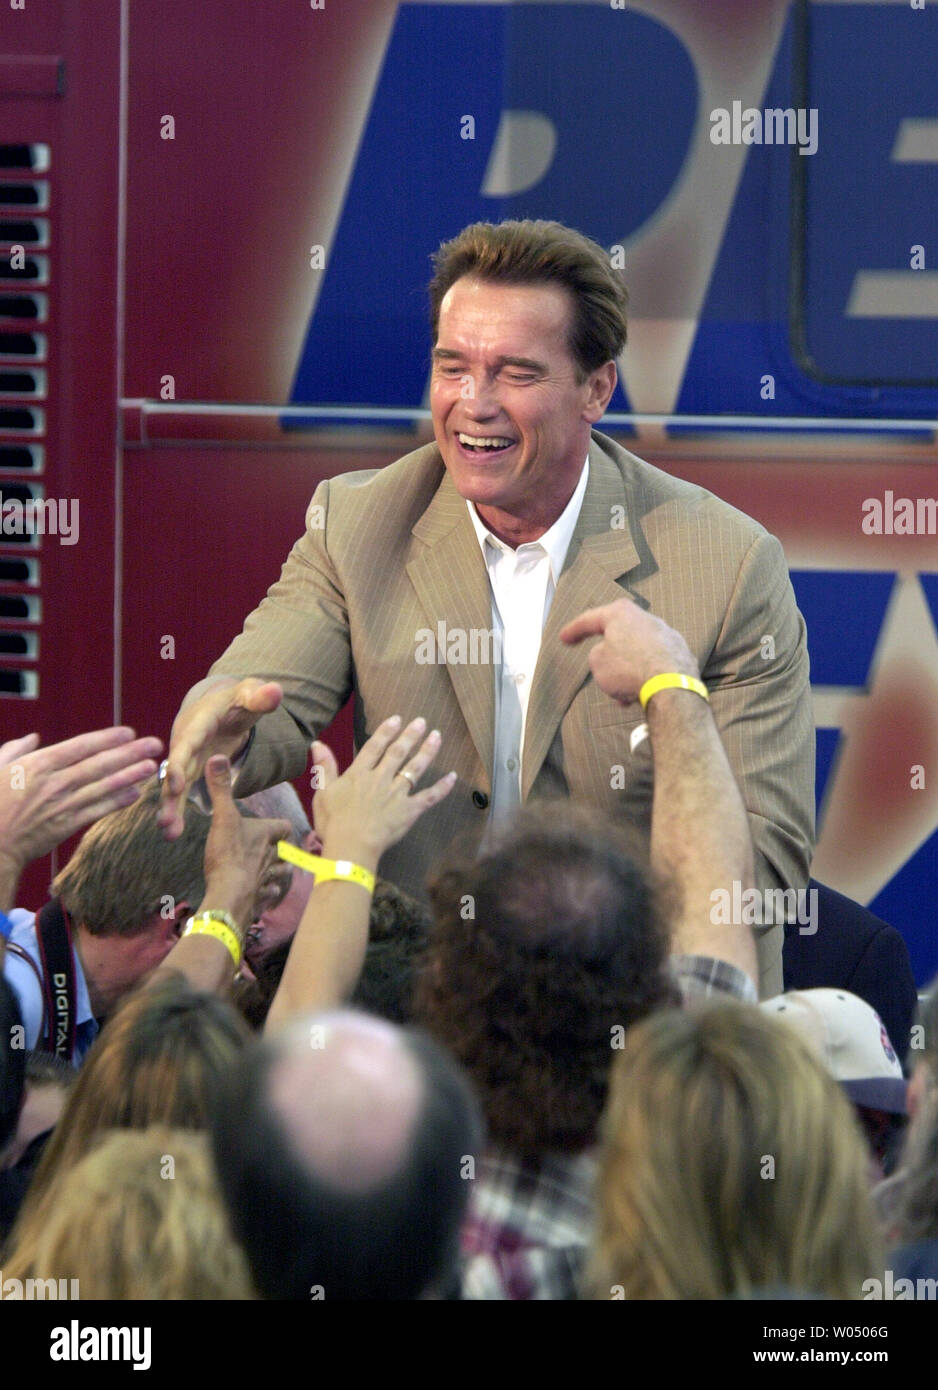 California Governor. Arnold Schwarzenegger greets supporters in front of his campaign bus in San Diego, California in which he will tour southern California November 5, 2005. Actors Warren Beatty and Annette Bening were on hand to protest his reform propositions that go to the voters November. 8, 2005. (UPI Photo/Earl S. Cryer) Stock Photo